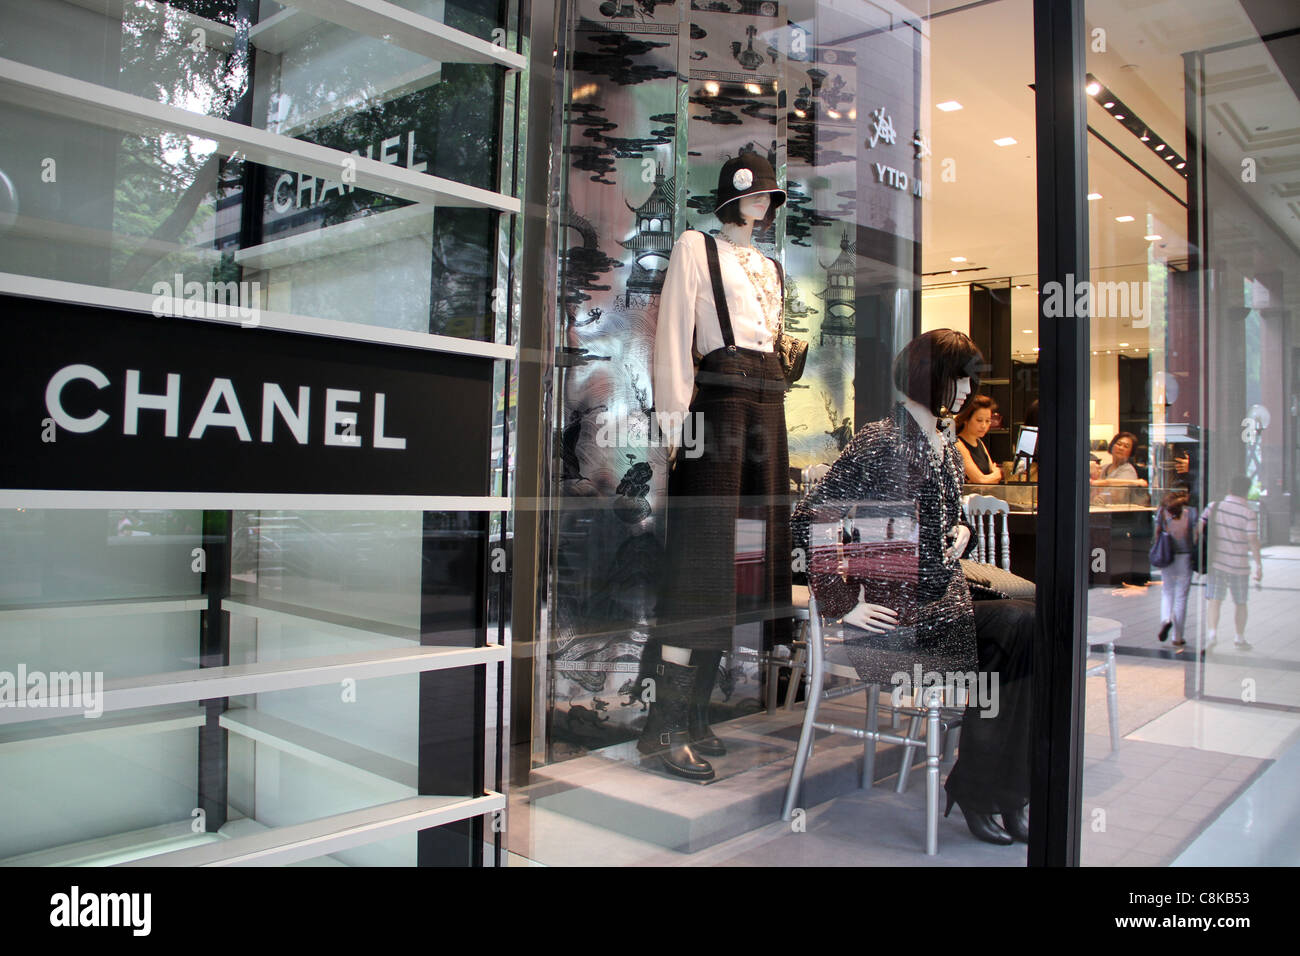 Chanel Opens Flagship Concession in Vancouver [Photos]